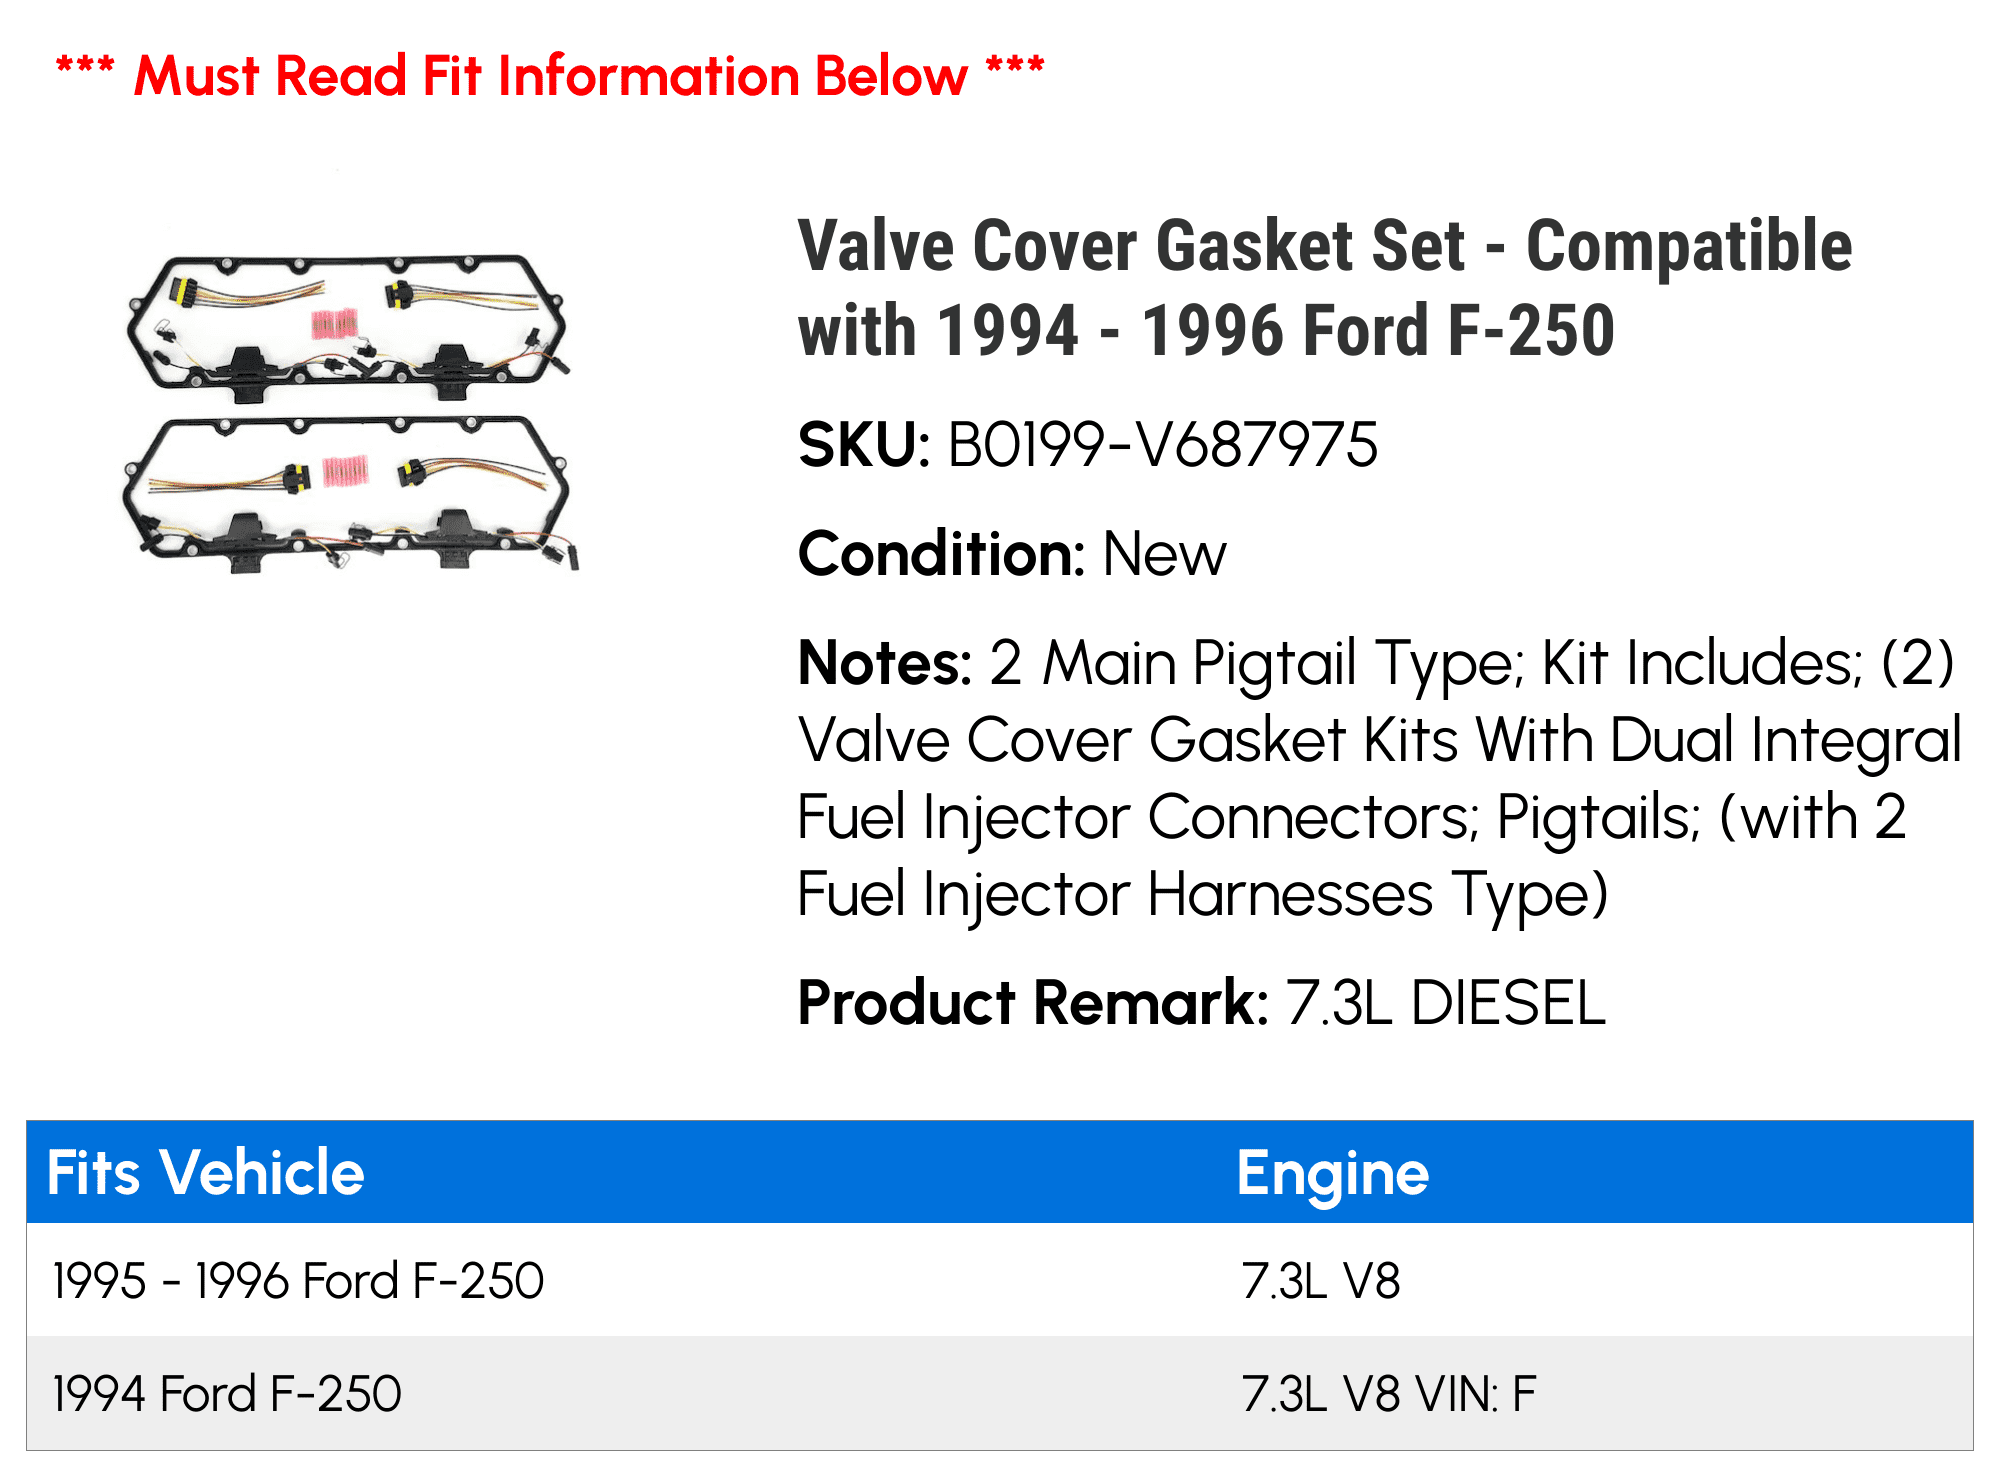 Valve Cover Gasket Set Compatible with 1994 1996 Ford F-250 1995 